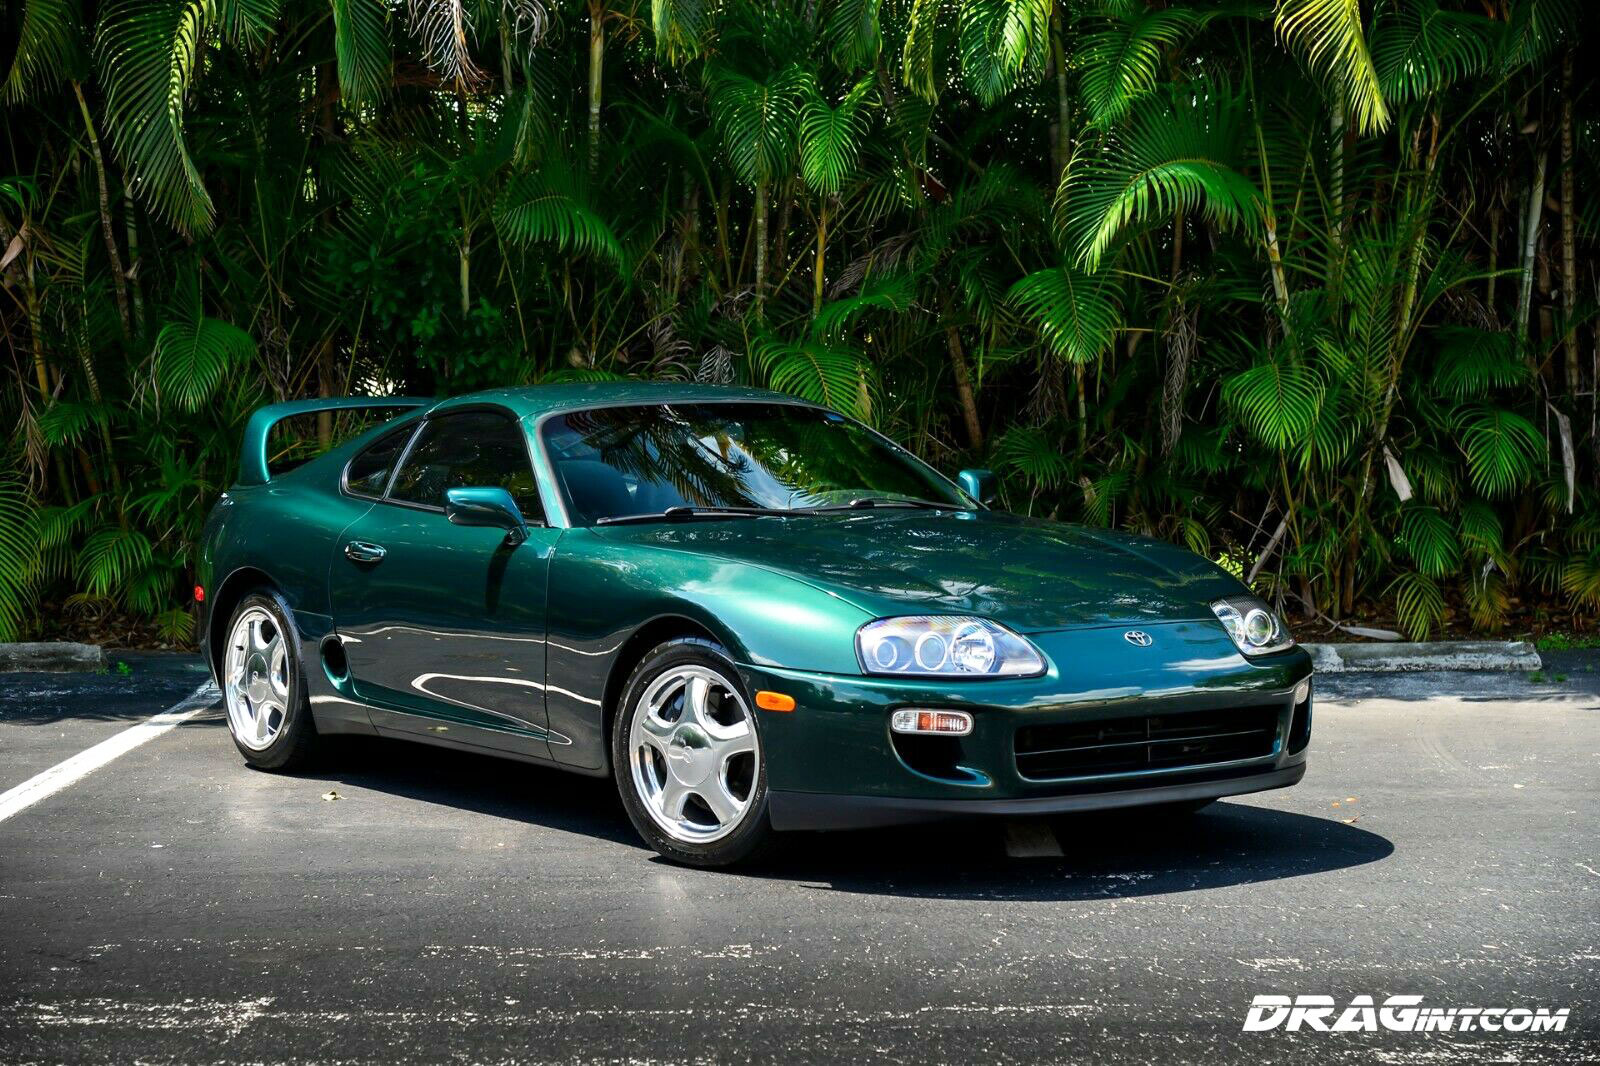 A Legendary '98 Toyota Supra Turbo, In Nearly Stock Form 